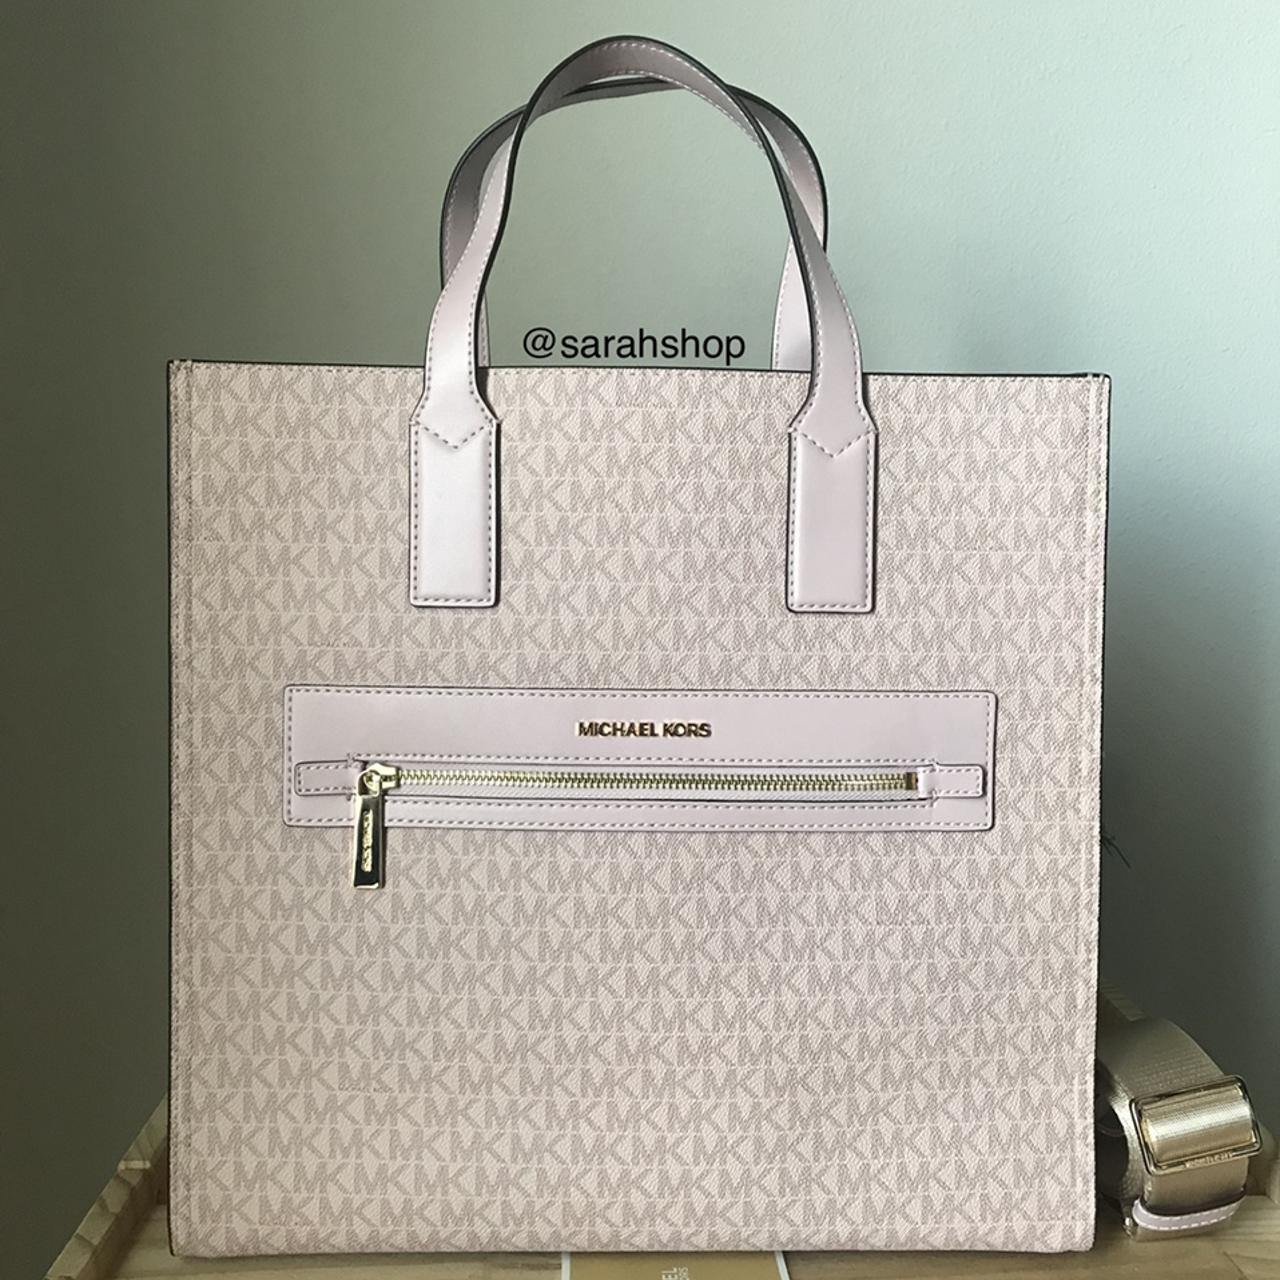 Michael Kors kenly large tote purse